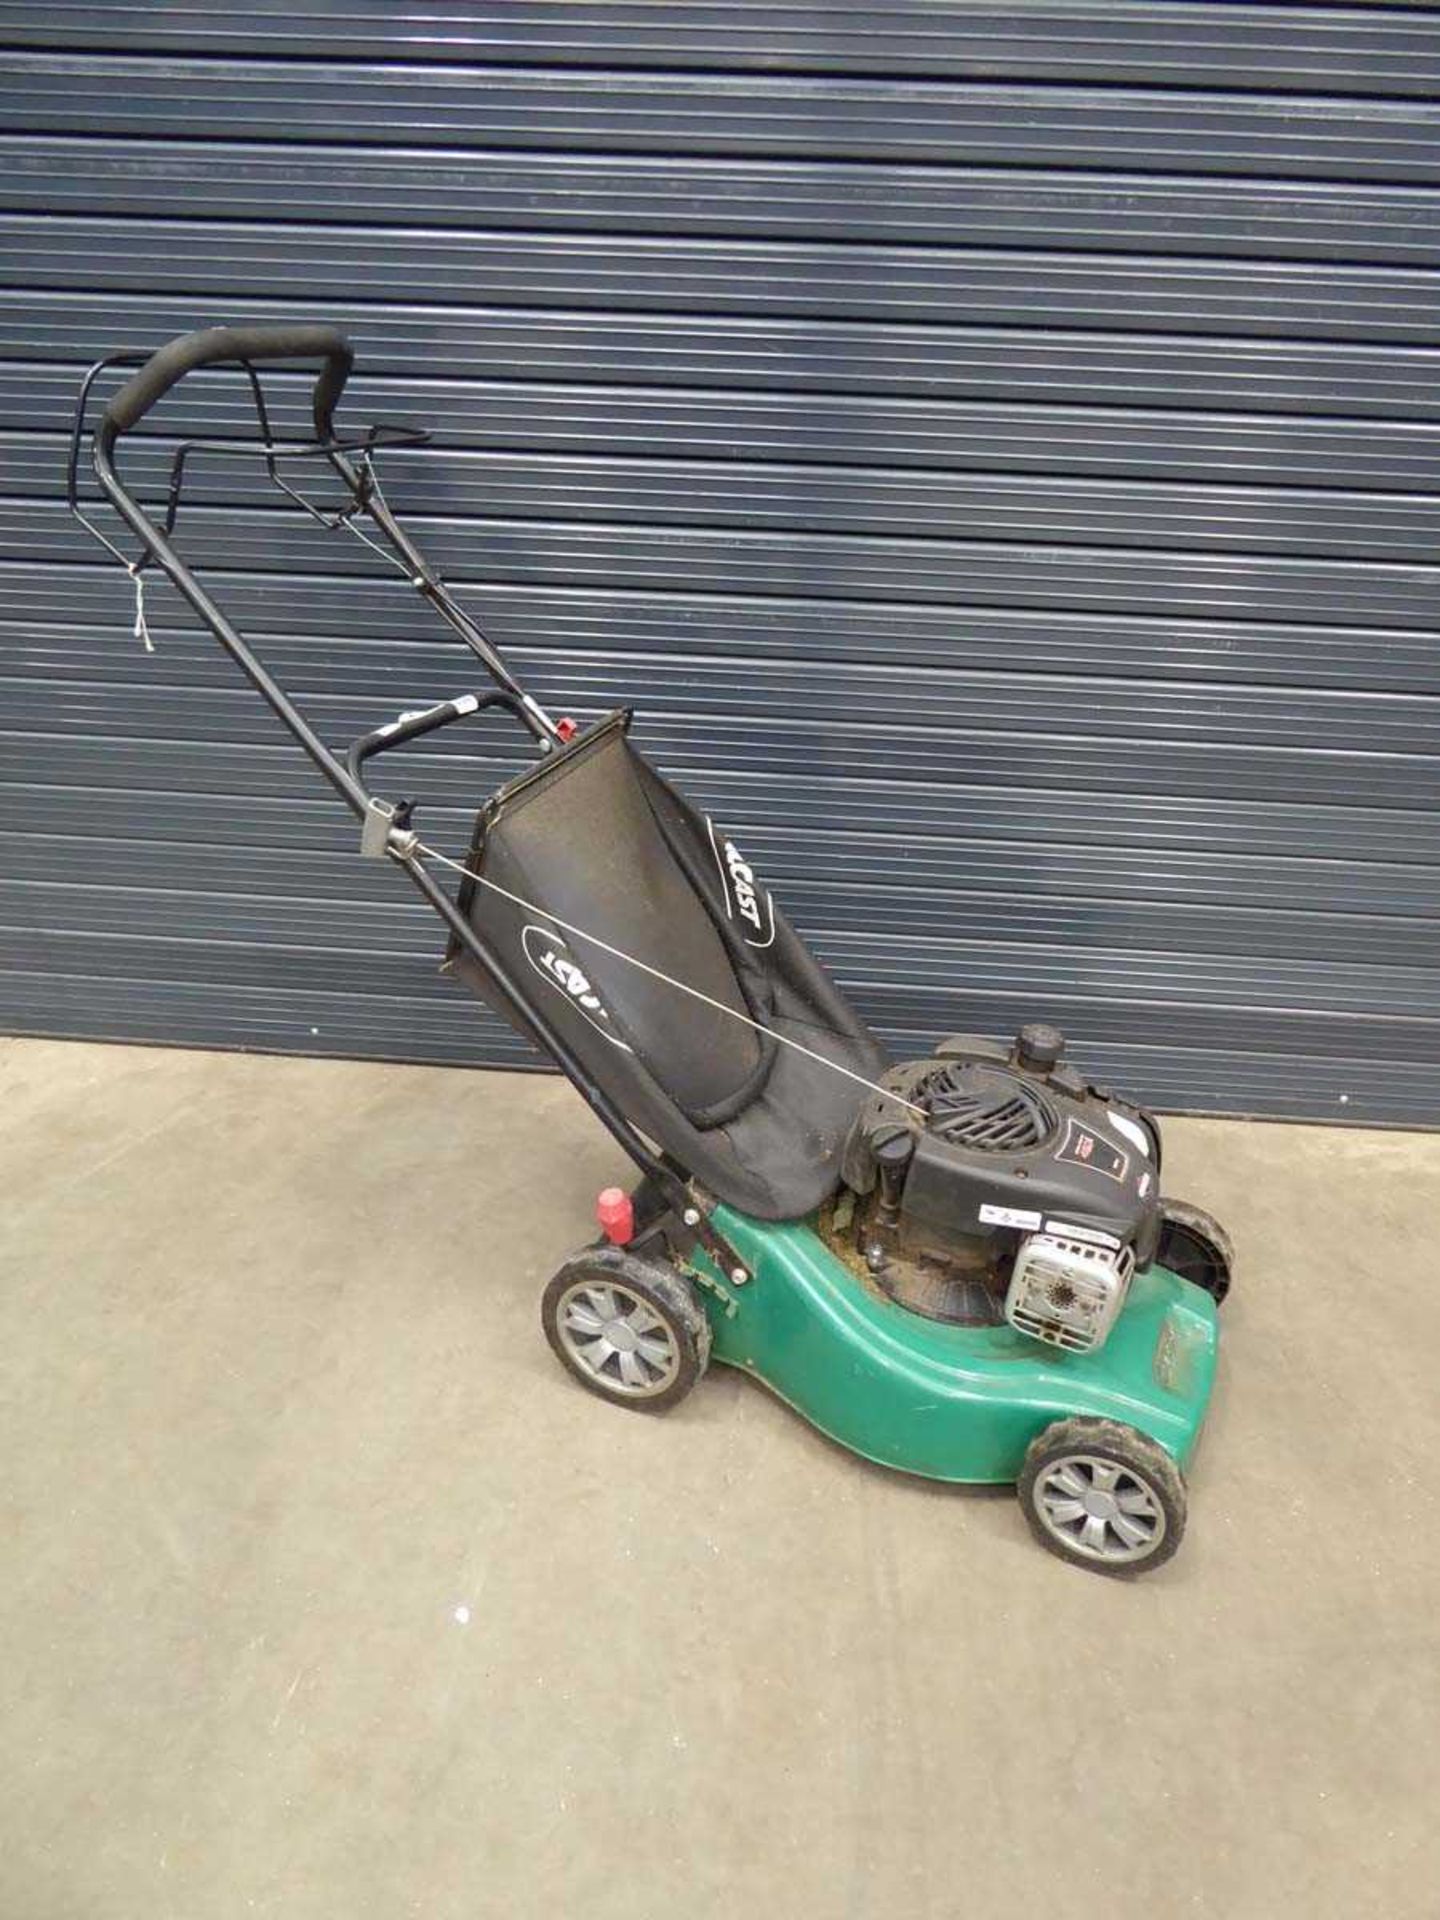 Qualcast petrol powered rotary mower with grass box